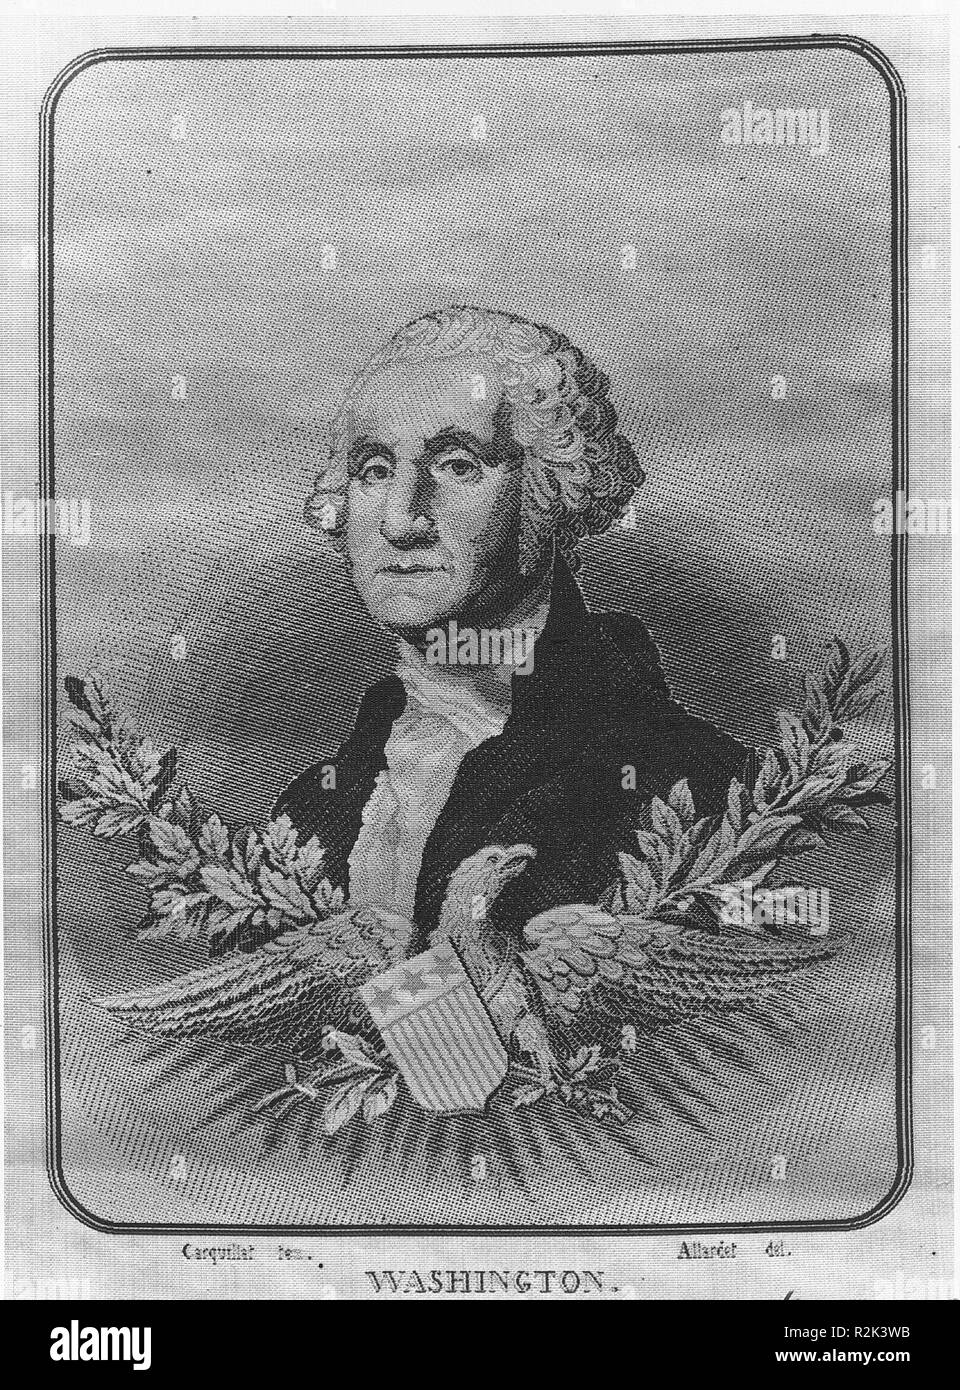 George Washington. Culture: French. Designer: Designed by Jacques Allardet. Dimensions: H. 11 3/8 x W. 8 1/2 inches (28.9 x 21.6 cm). Maker: Woven by Michel-Marie Carquillat (French, 1803-1884). Date: 1865.  Silkworms produce irregular and less smooth fibroins at the beginning and the end of fabricating their cocoons. Some weavers discard these silk fibers to control the overall yarn quality. As this textile's warps and wefts are not uniform, it is possible that part of the textile was woven using the irregular fibers. However, the final product does not reveal the silk yarn's imperfect qualit Stock Photo